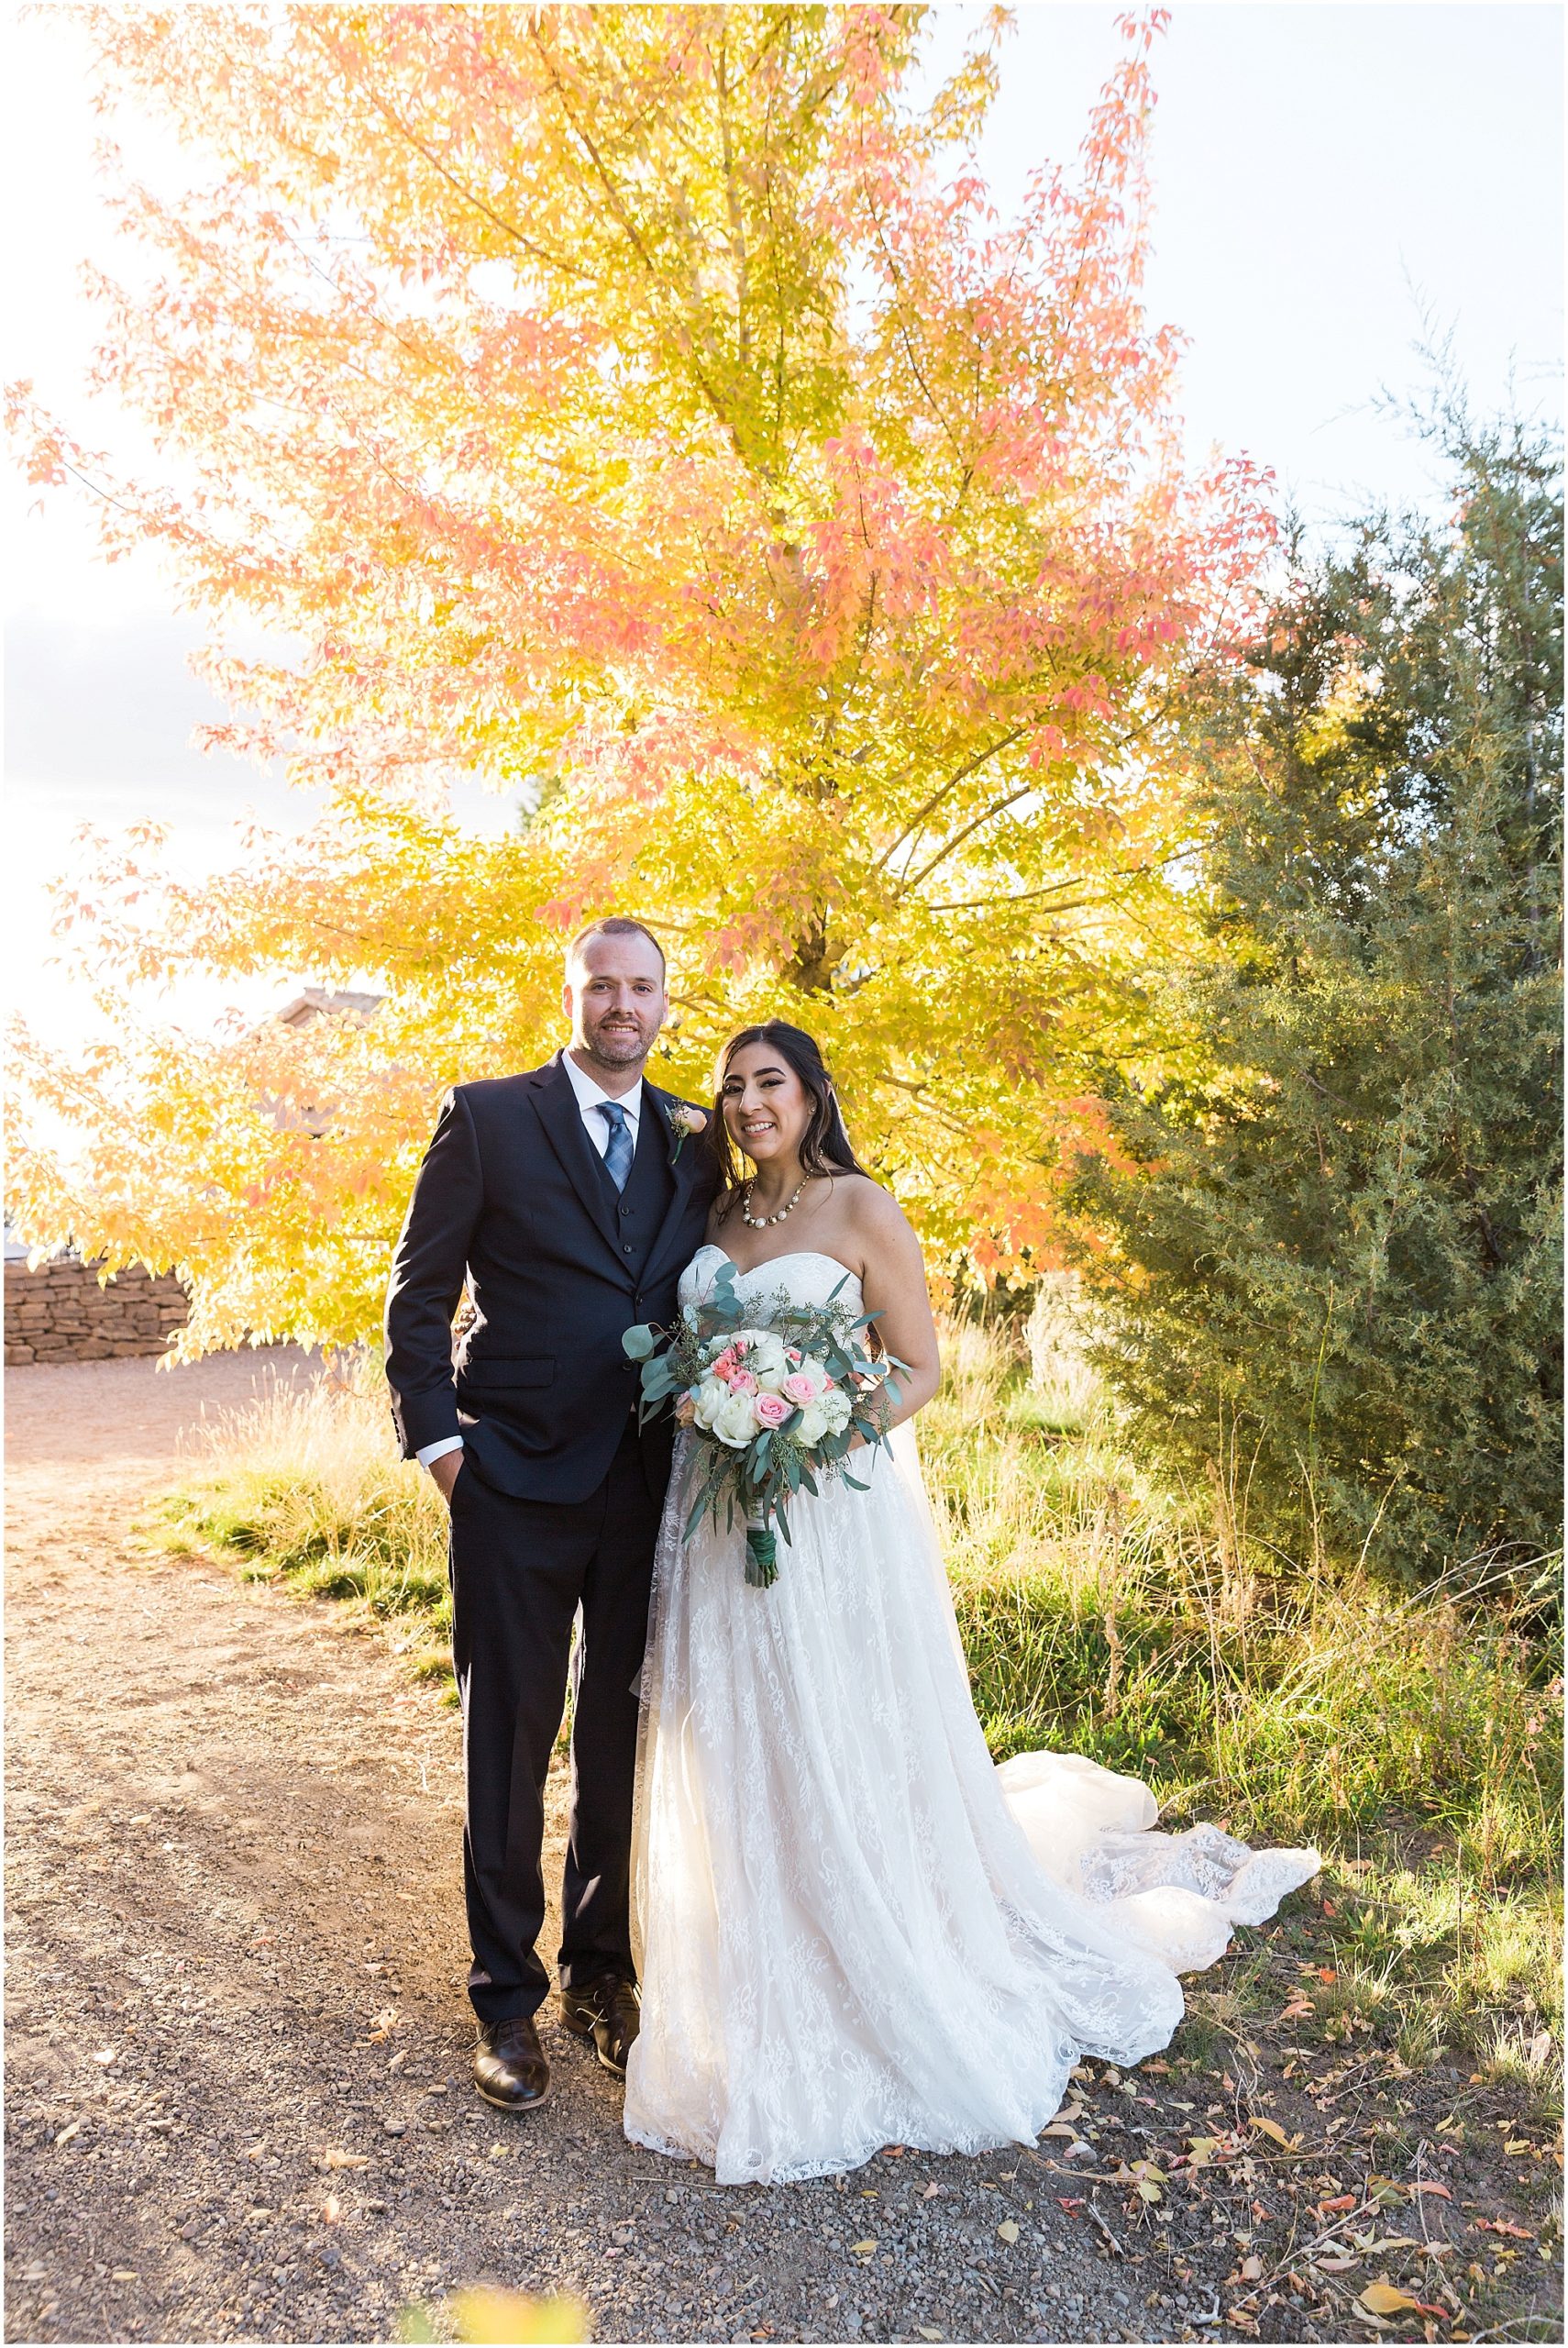 The fall color was just starting to change for at the Tuscan Stables, making for a pretty portrait of the wedding couple at their Ranch at the Canyons fall wedding in Oregon. | Erica Swantek Photography